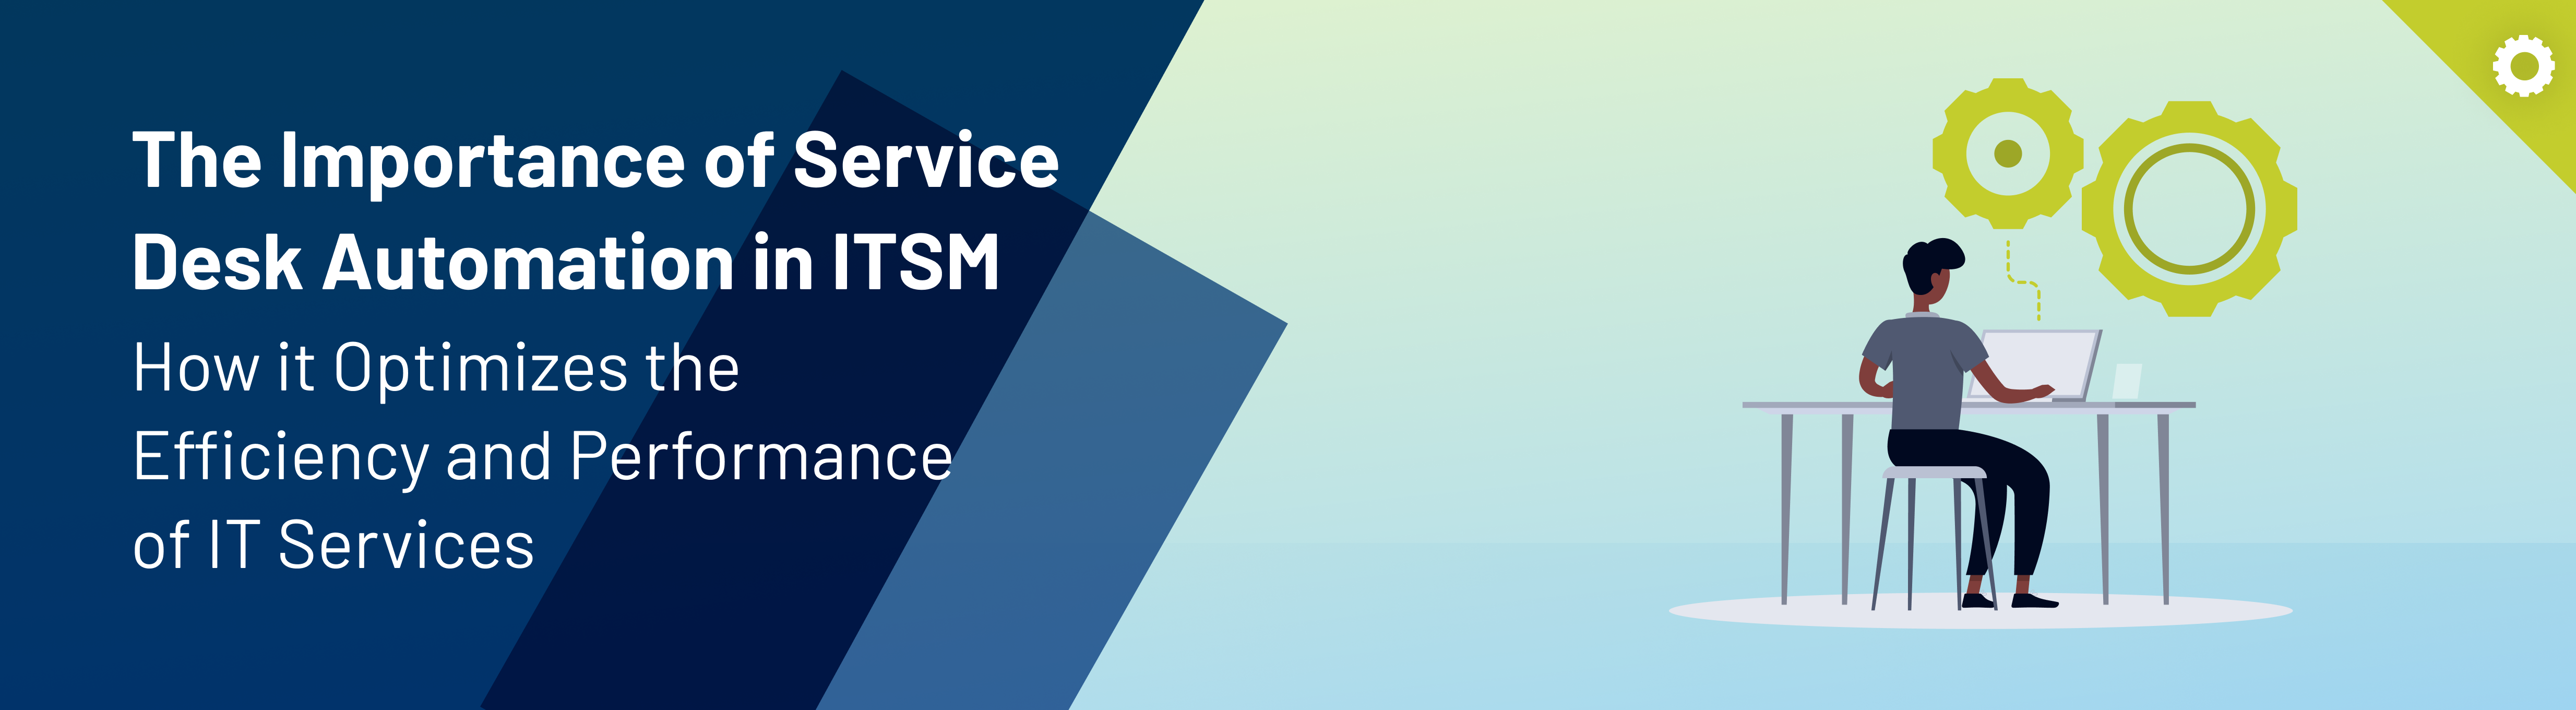 The Importance of Service Desk Automation in ITSM - banner